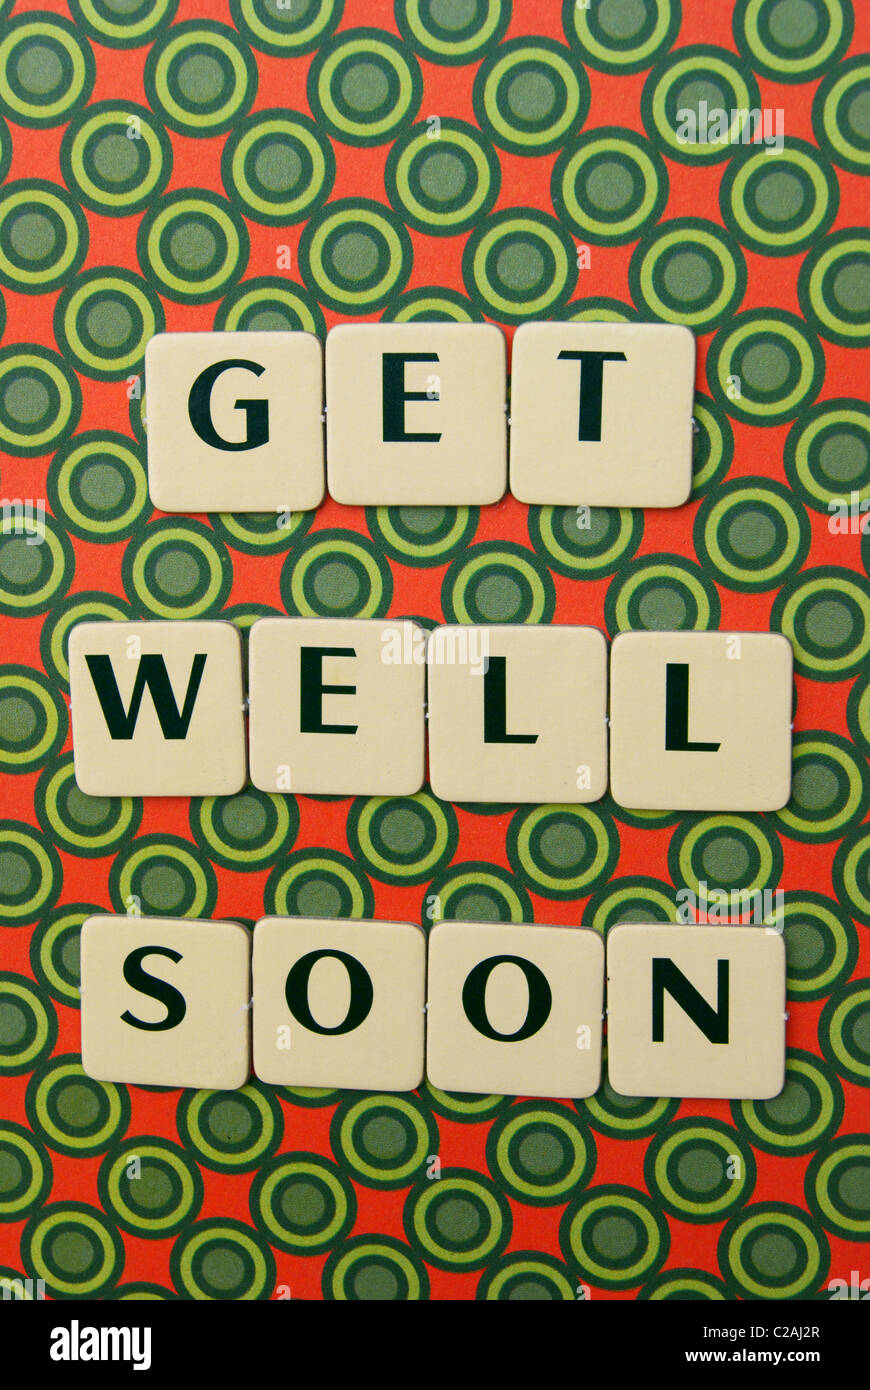 Get well soon Stock Photo